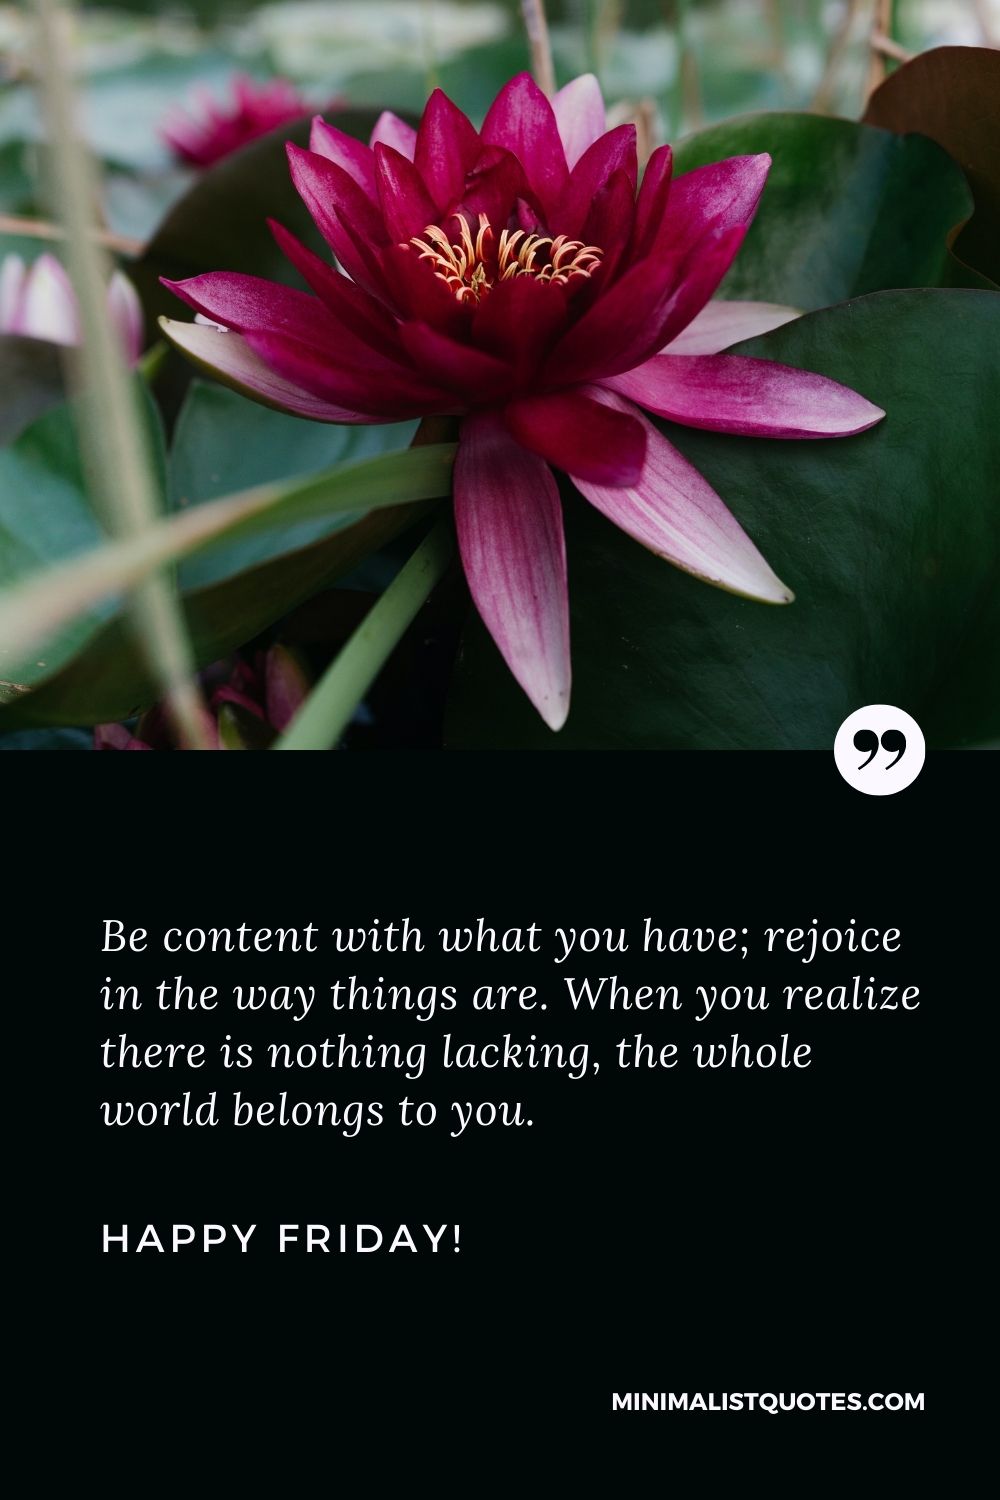 Friday morning greetings: Be content with what you have; rejoice in the way things are. When you realize there is nothing lacking, the whole world belongs to you. Happy Friday!